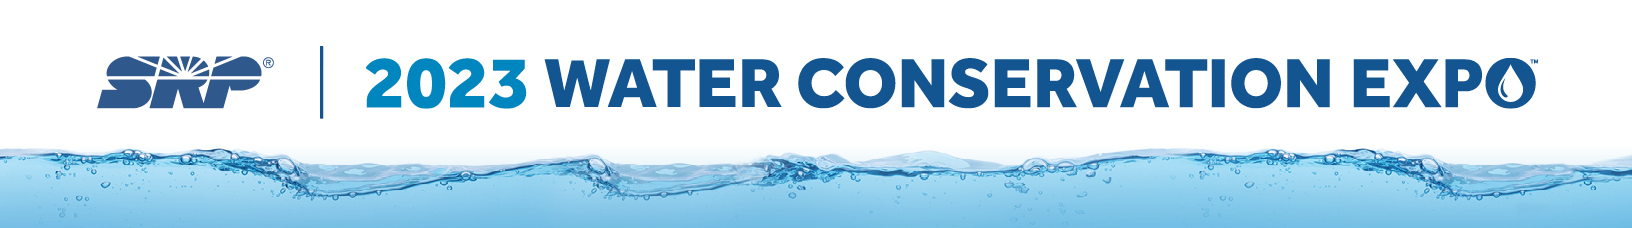 SRP Water Conservation Expo